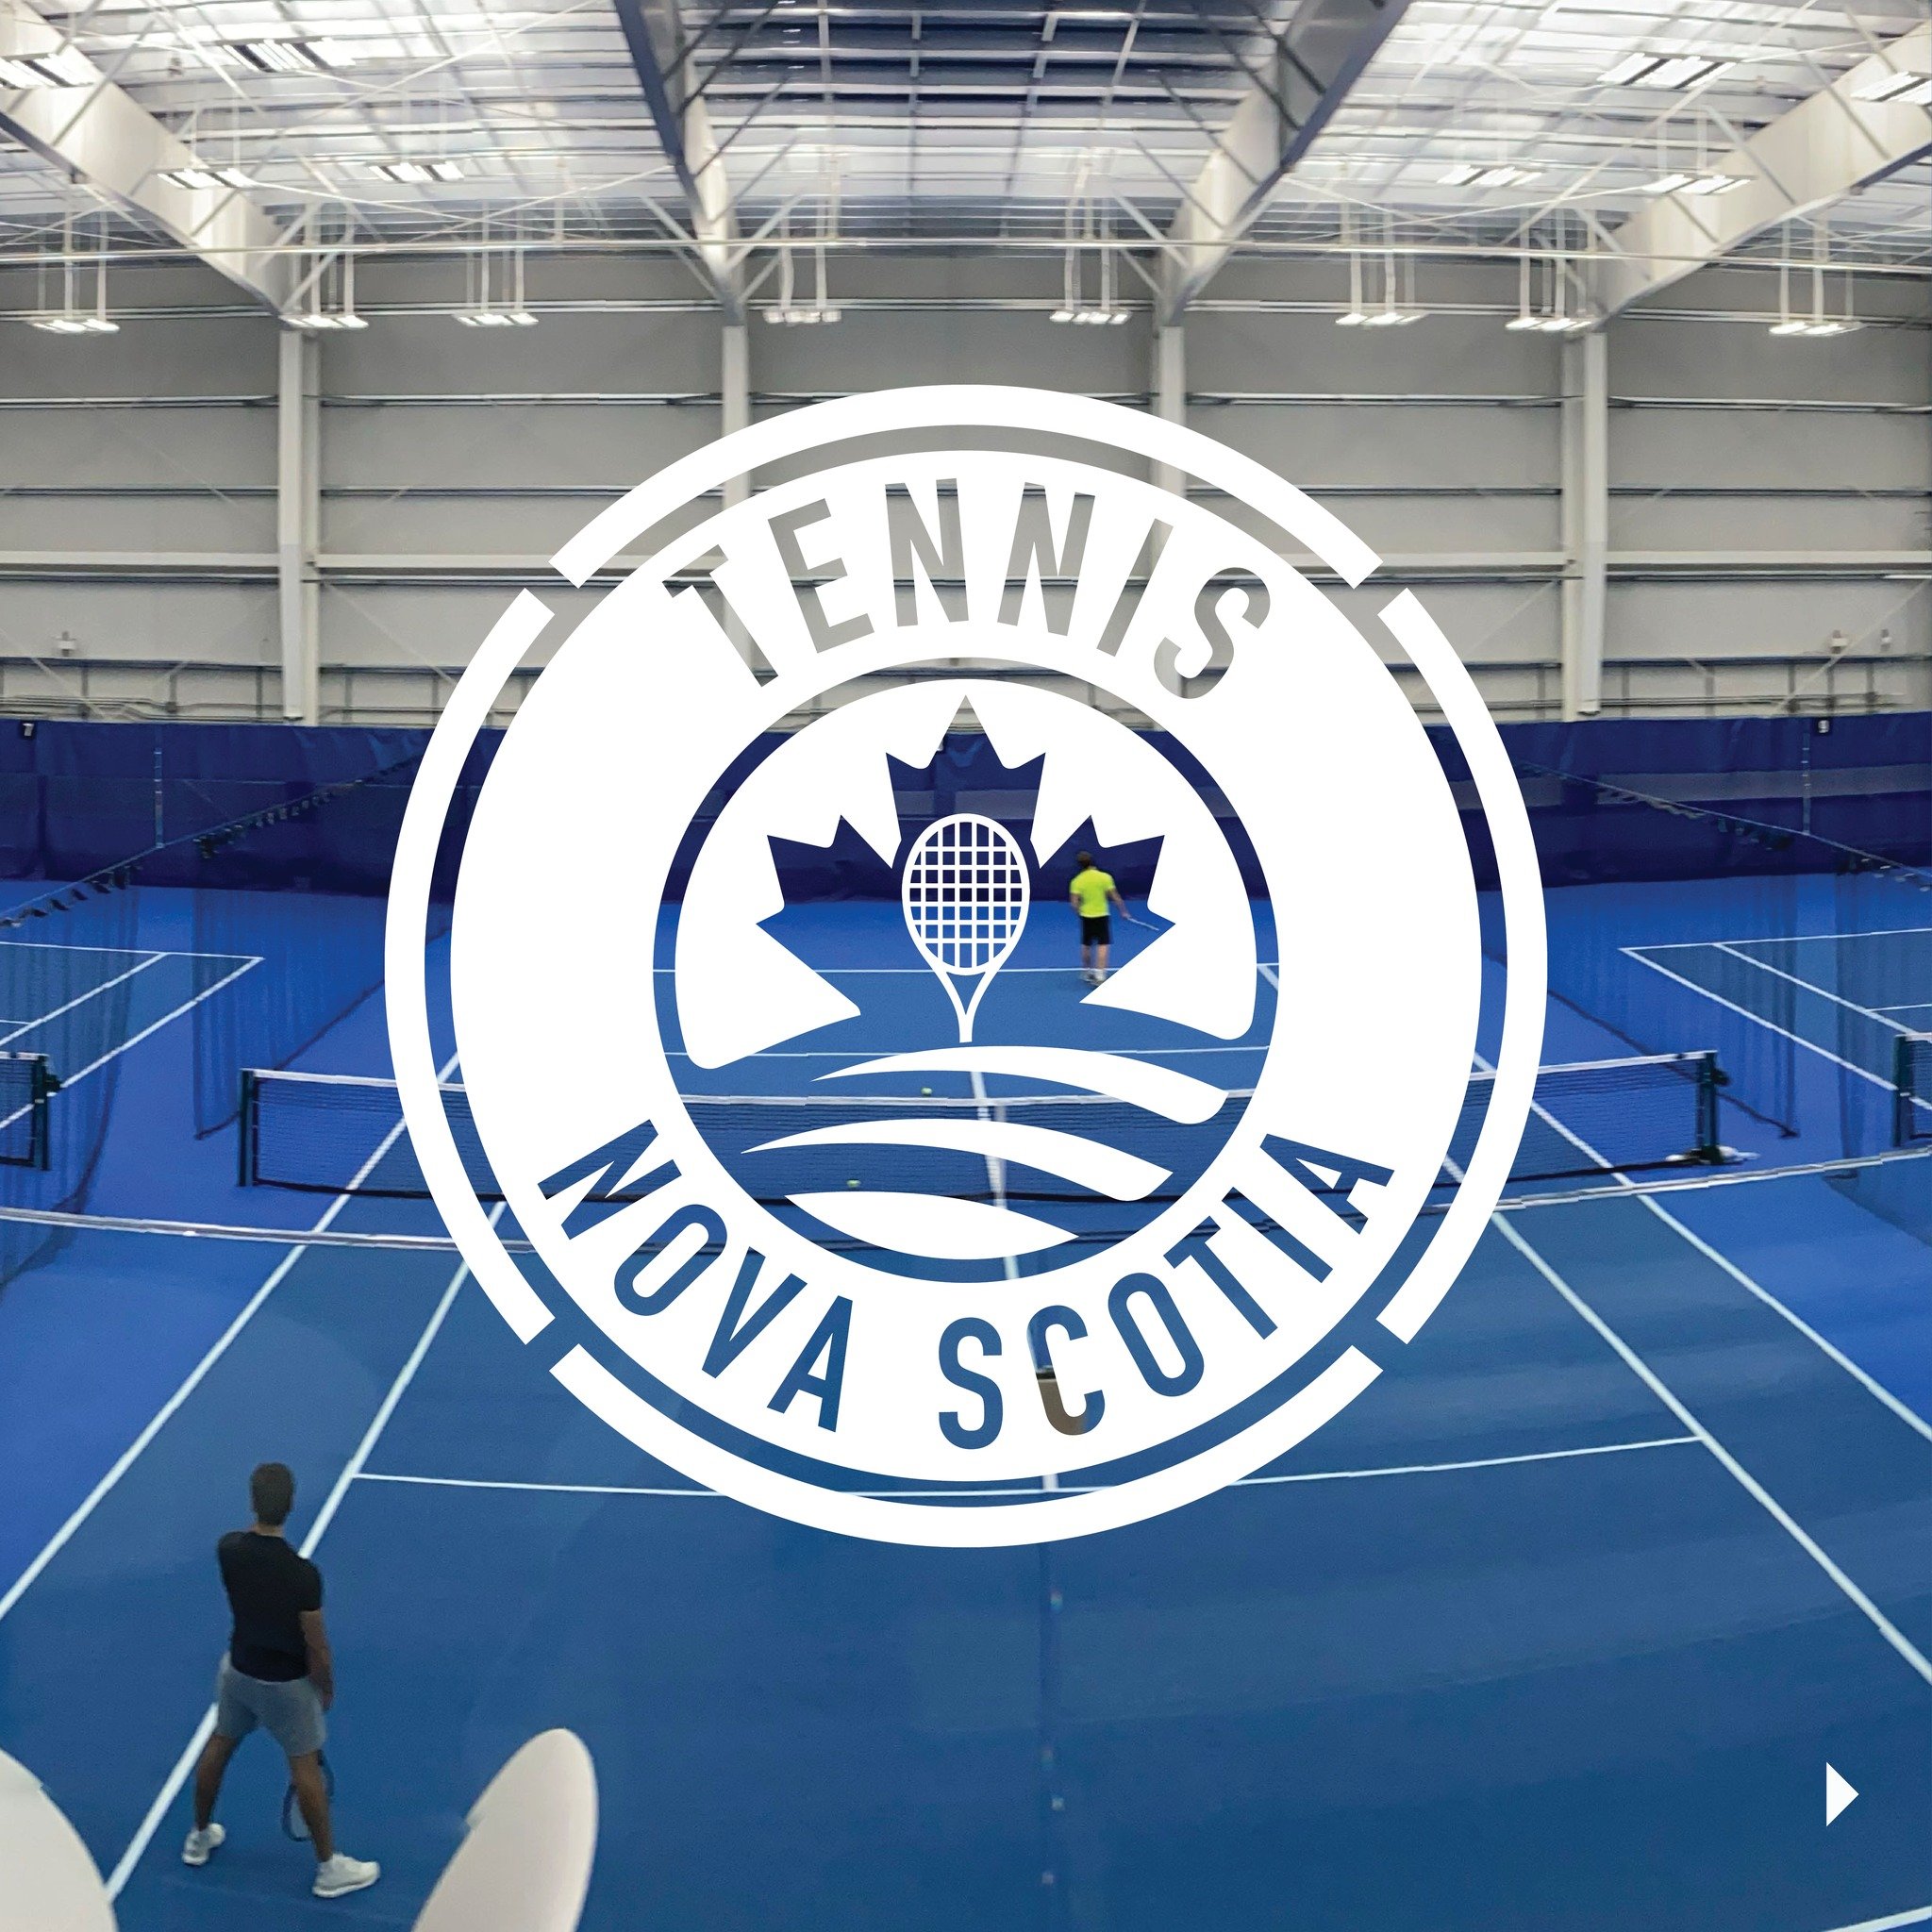 Support is critical to any organization. Tennis Nova Scotia is committed to growing tennis in Nova Scotia and providing opportunities for all to participate at a level consistent with their personal goals and aspirations.

TNS relies on individuals a